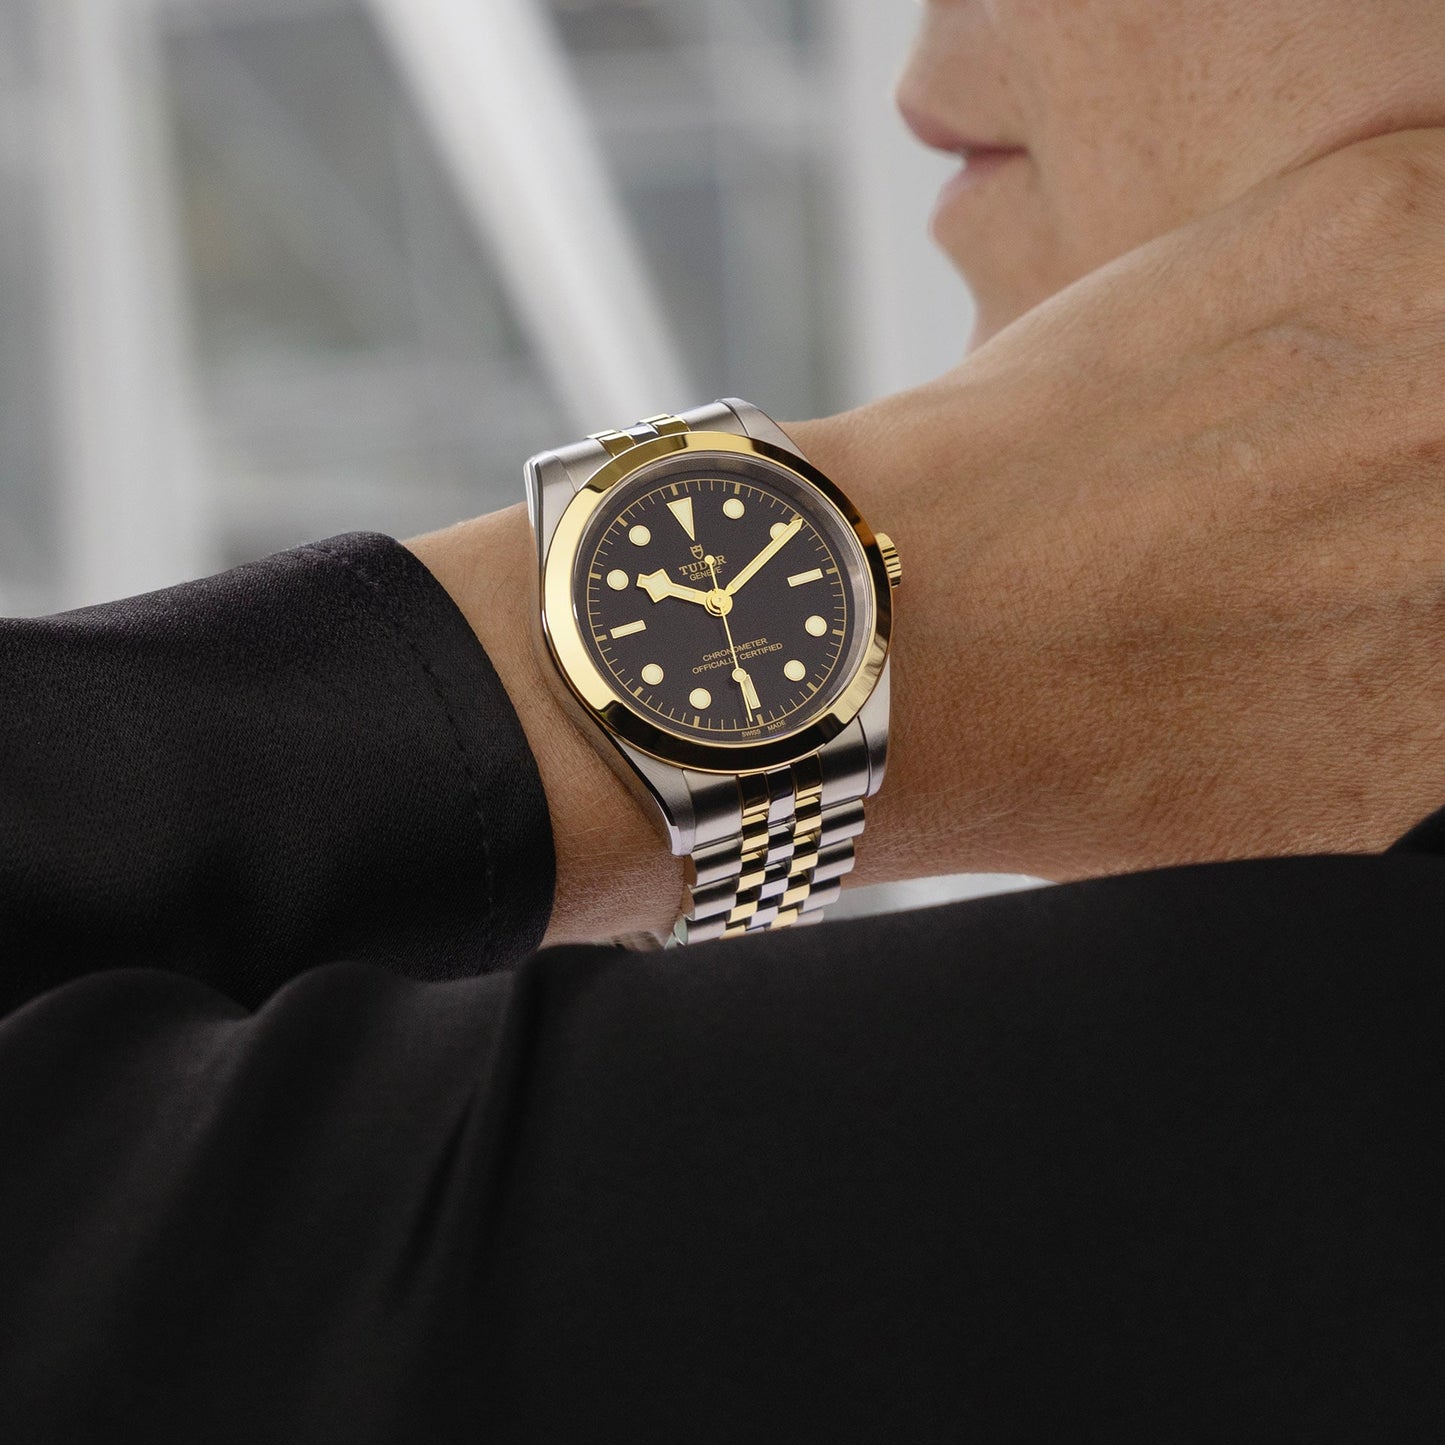 Tudor Black Bay 39 S&G, 316L Stainless Steel and 18k Yellow Gold, Ref# M79663-0001, Watch on hand